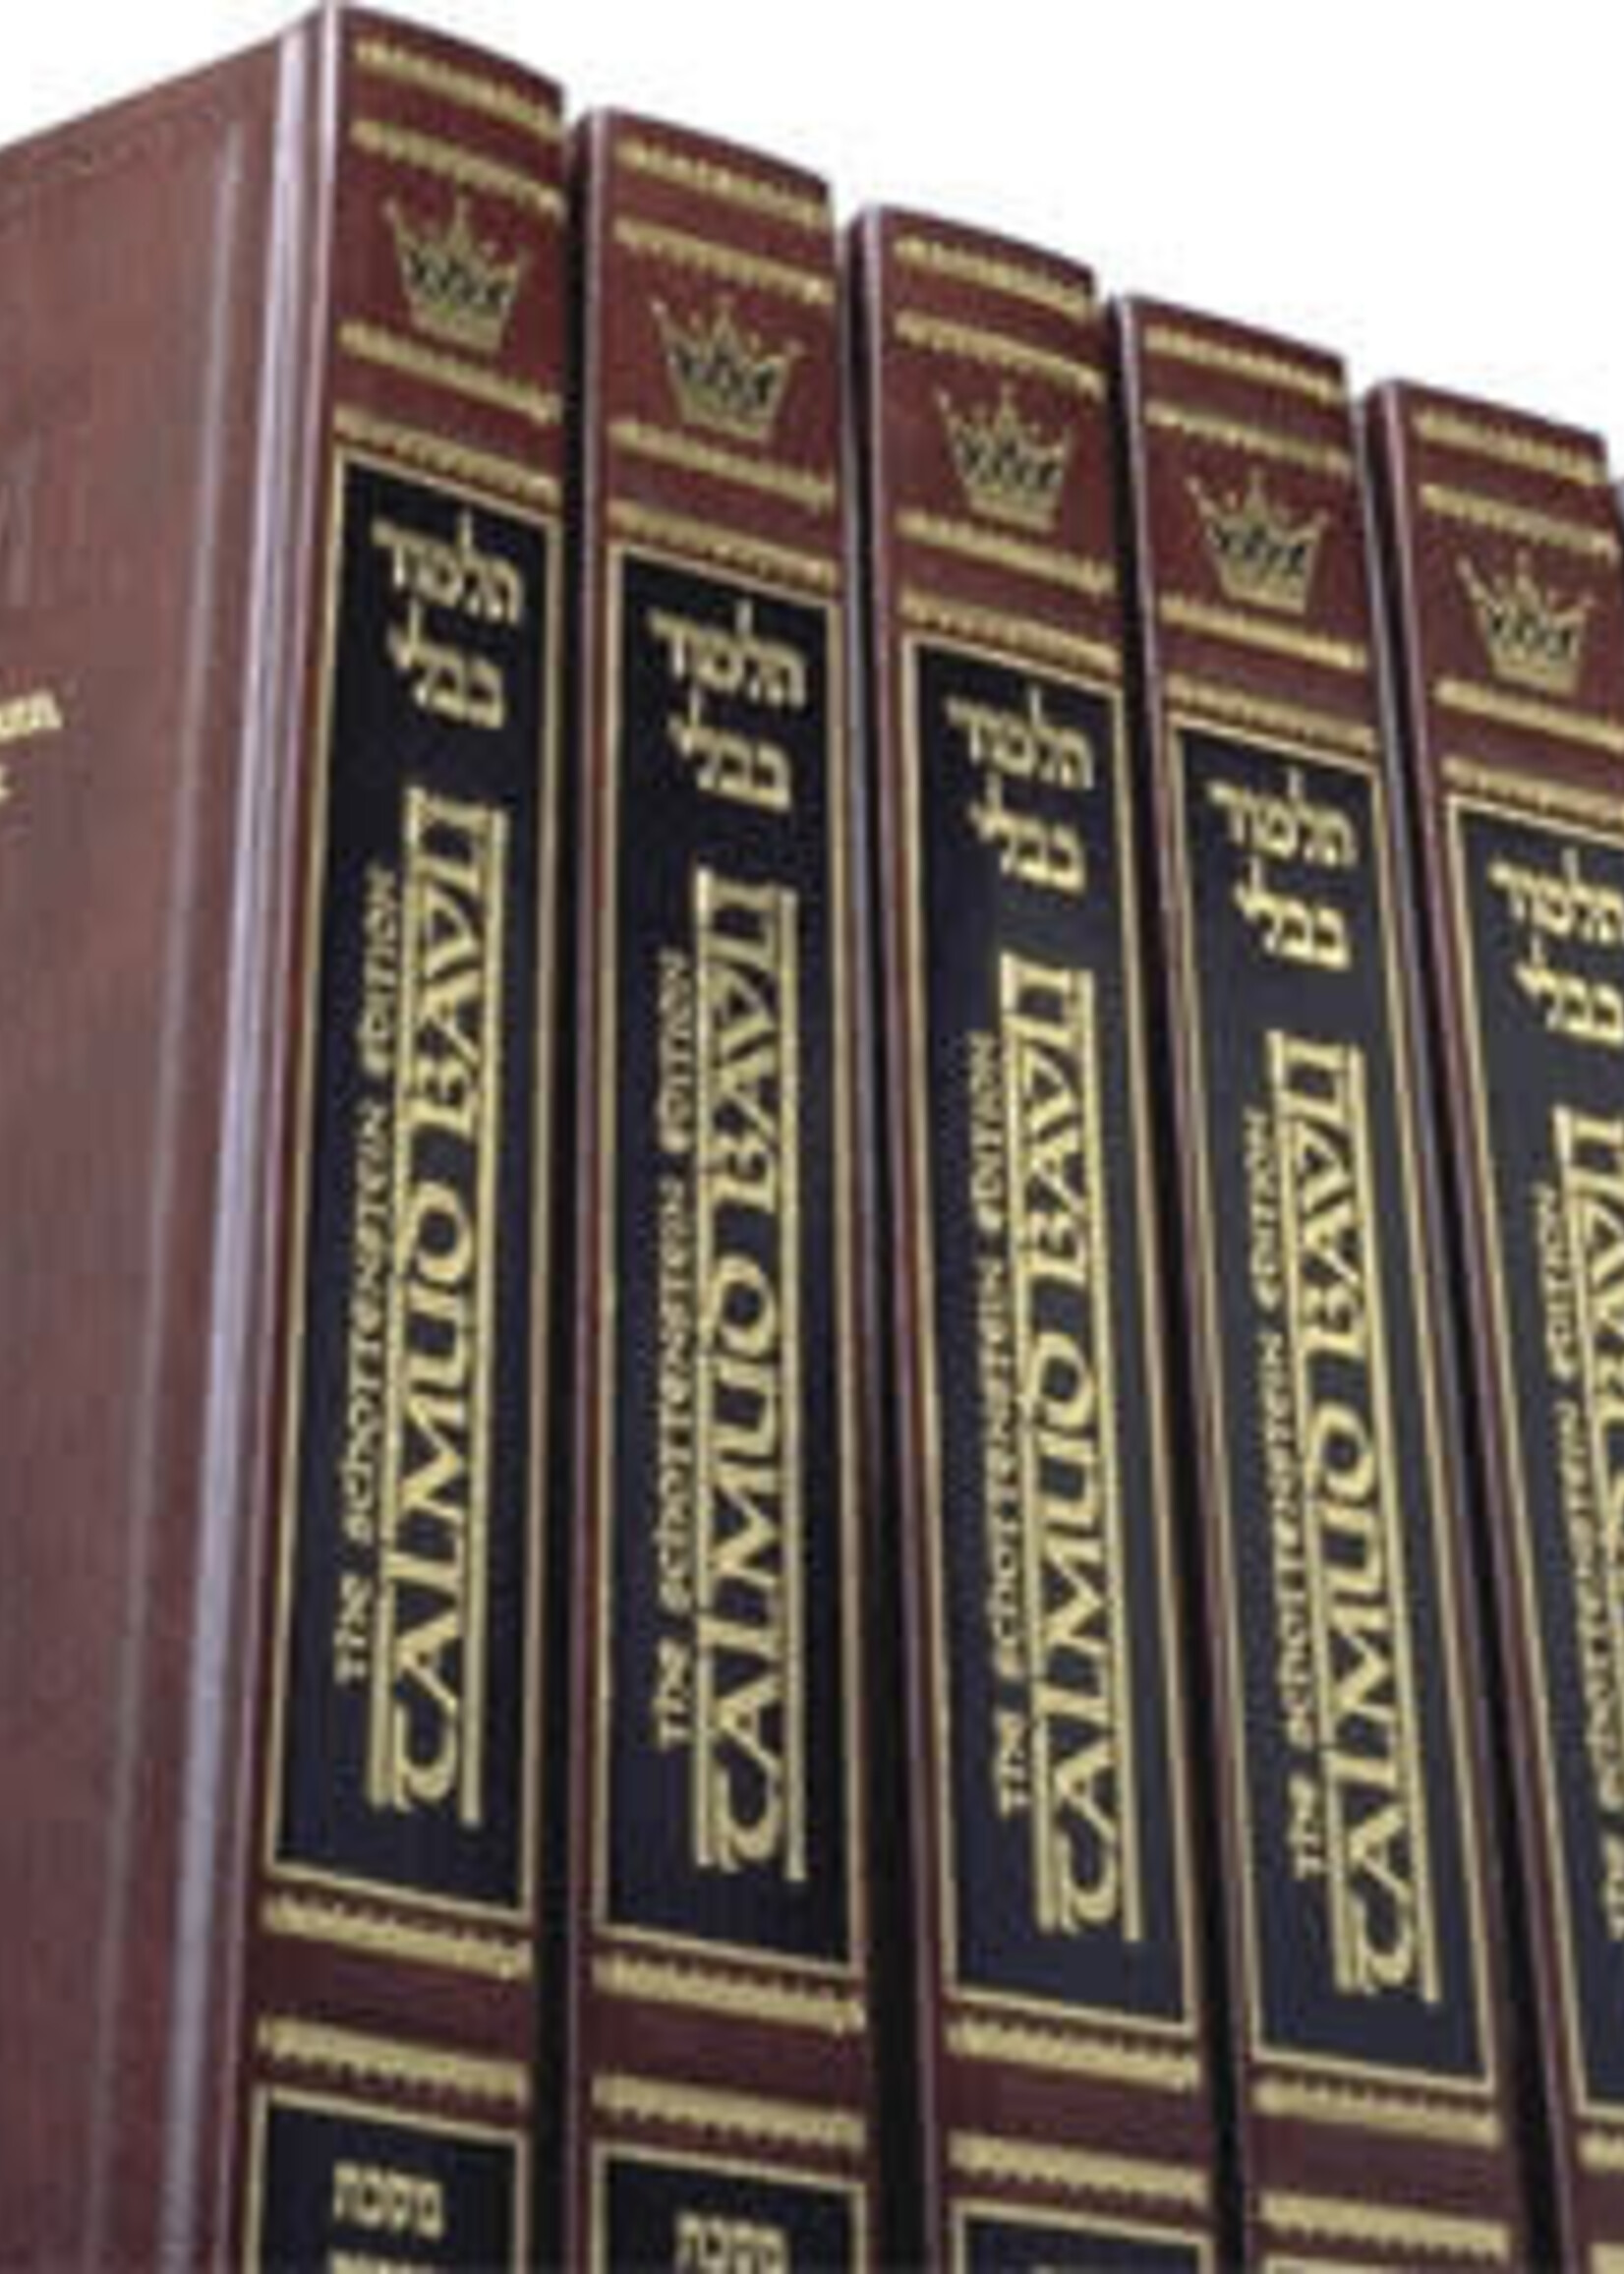 COMPLETE FULL SIZE SCHOTTENSTEIN EDITION OF THE TALMUD ENGLISH - 73 VOLUMES